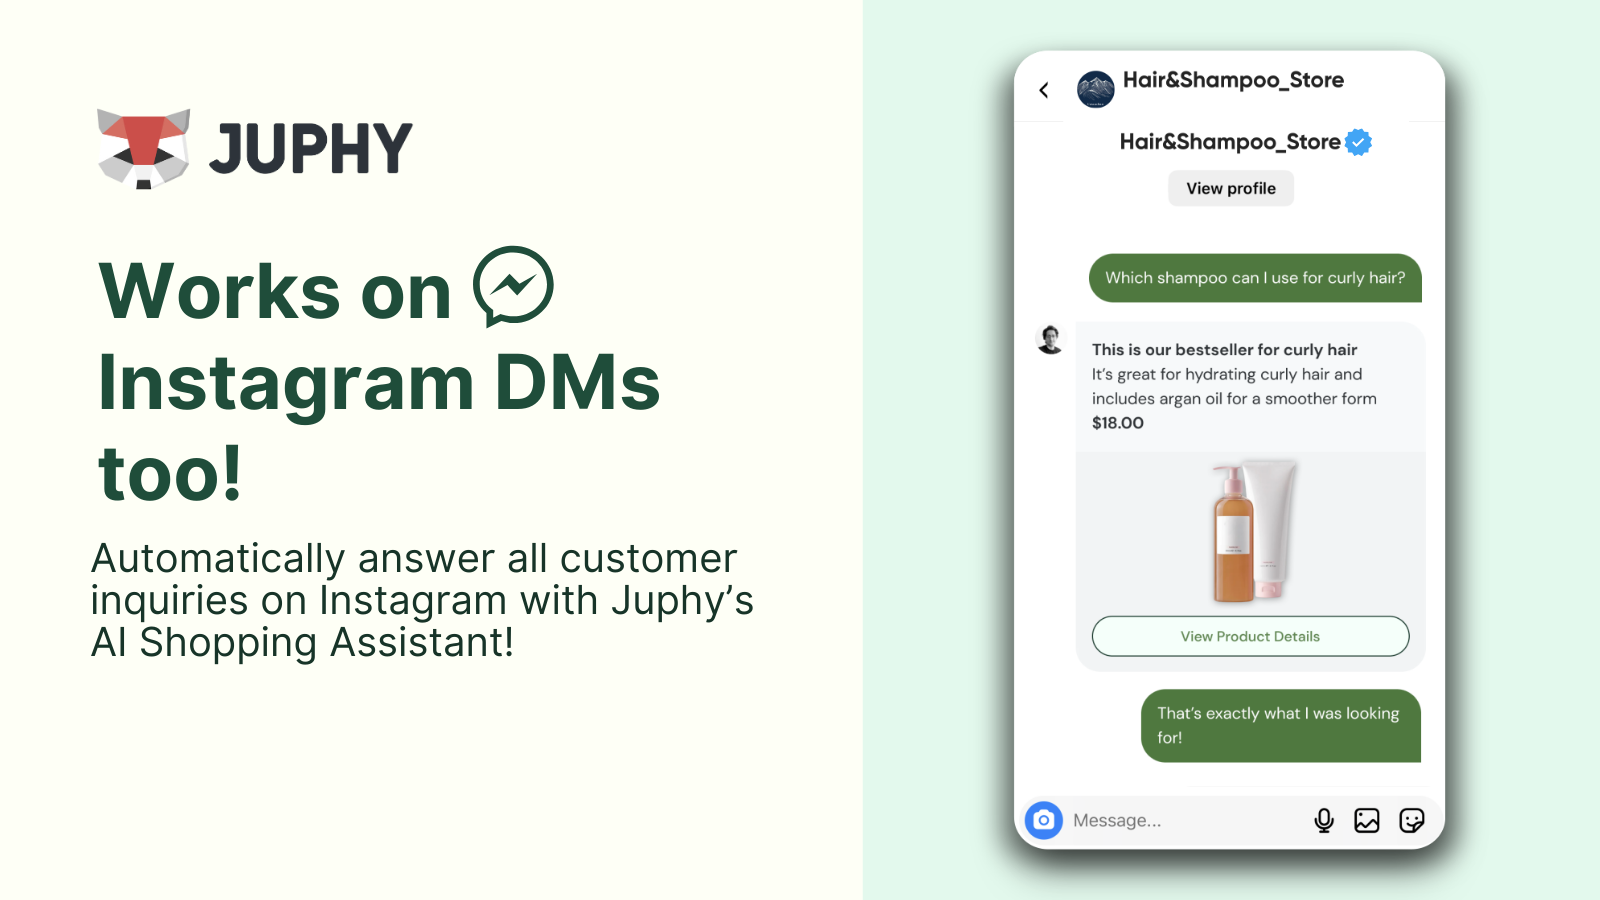 With Juphy's AI Shopping Assistant, you can connect your chatbot to Instagram and let it handle product inquiries in your DMs while guiding potential customers to your Shopify store. 